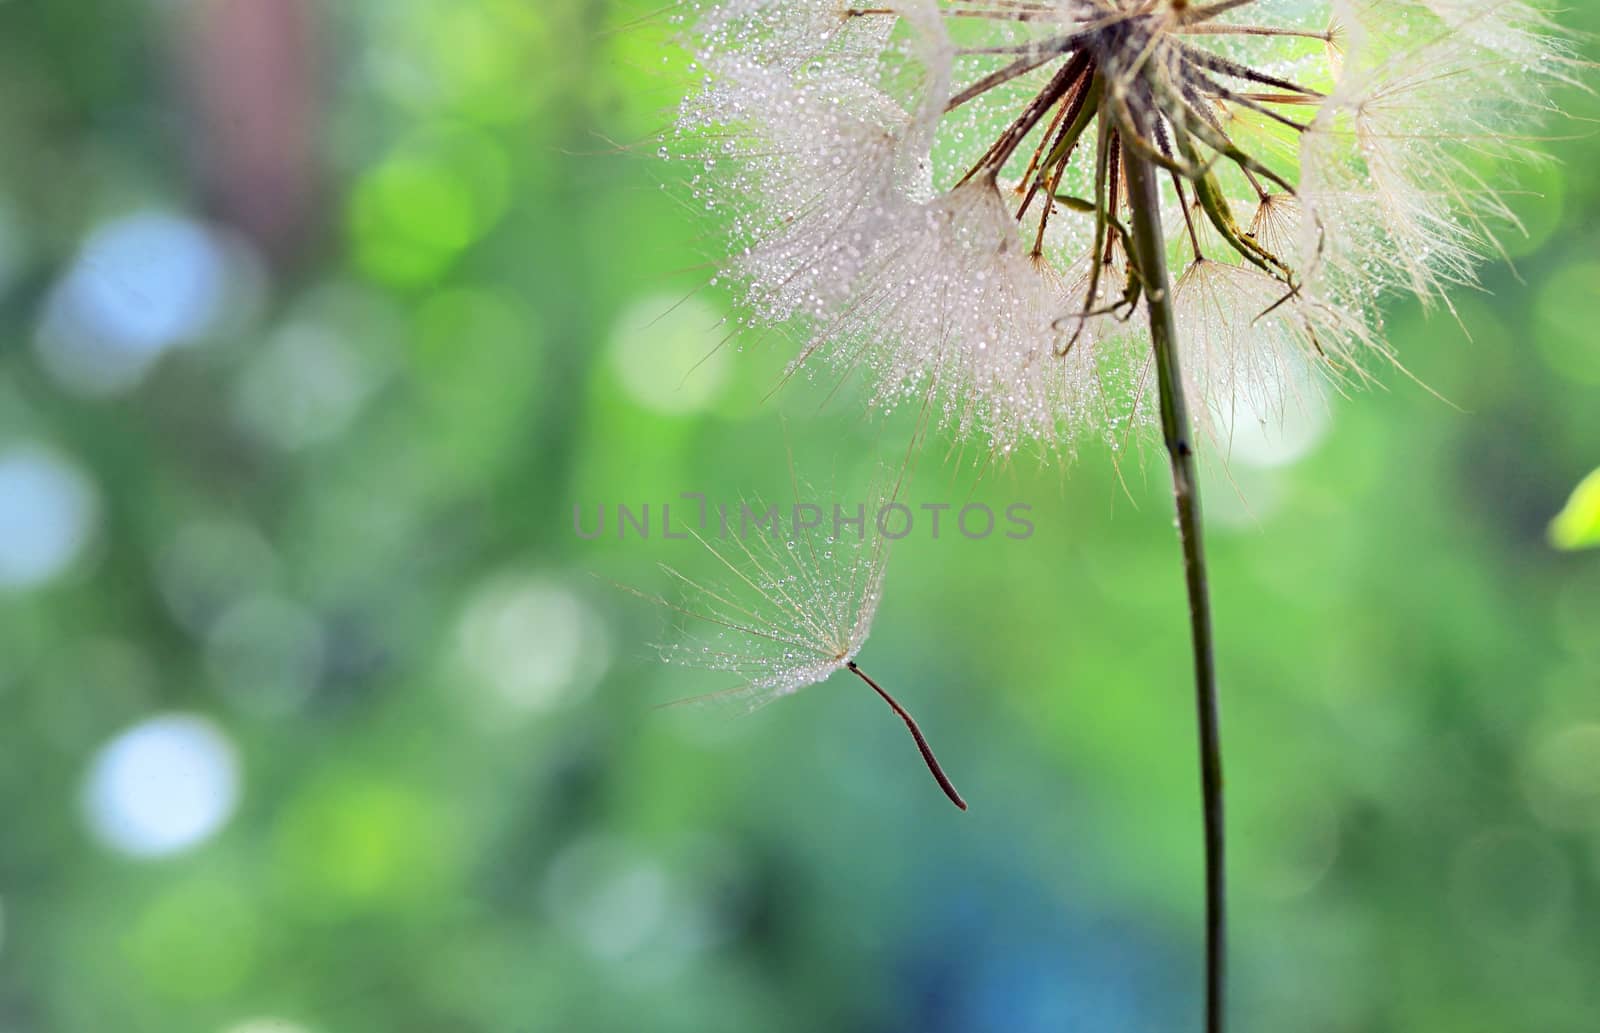 Dew drops on a dandelion seed by mady70